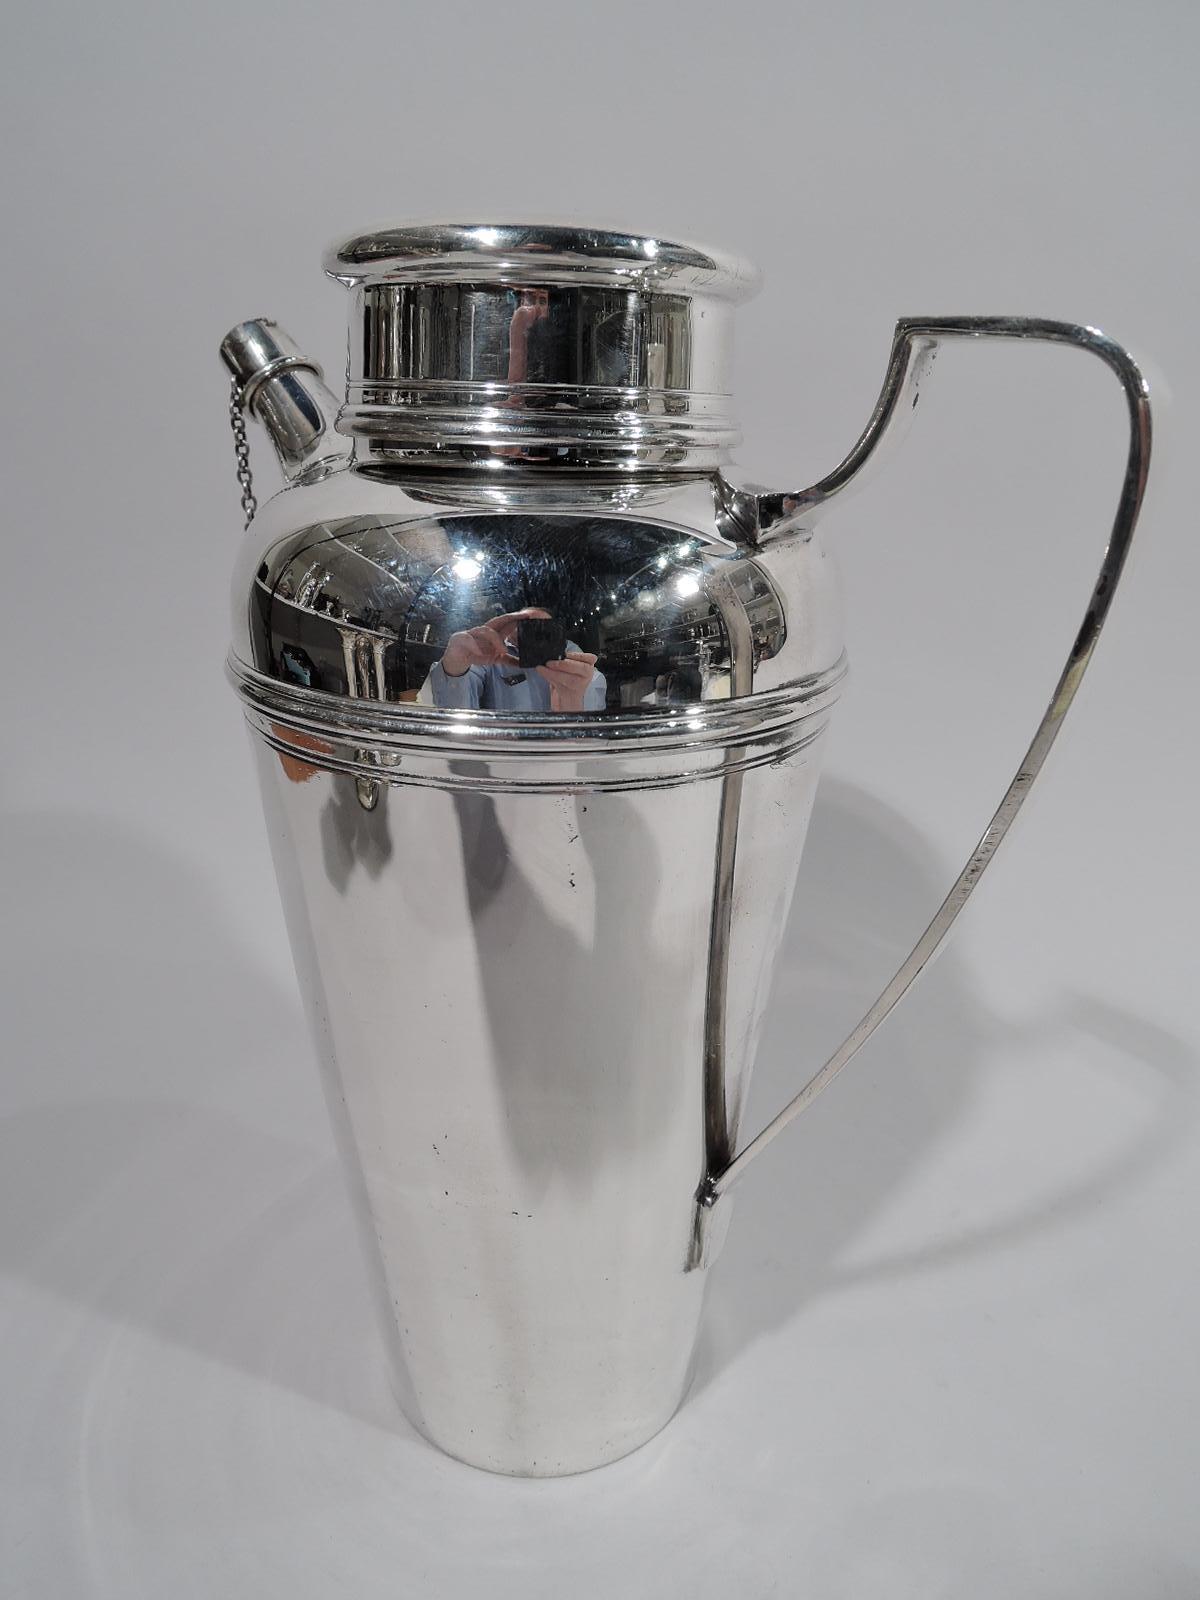 Art Deco sterling silver cocktail shaker. Made by Tiffany & Co. in New York. Straight and tapering bowl with curved shoulder, high scrolled bracket handle, short neck with overhanging flat-topped cover, and stubby, tapering spout with chained cap.